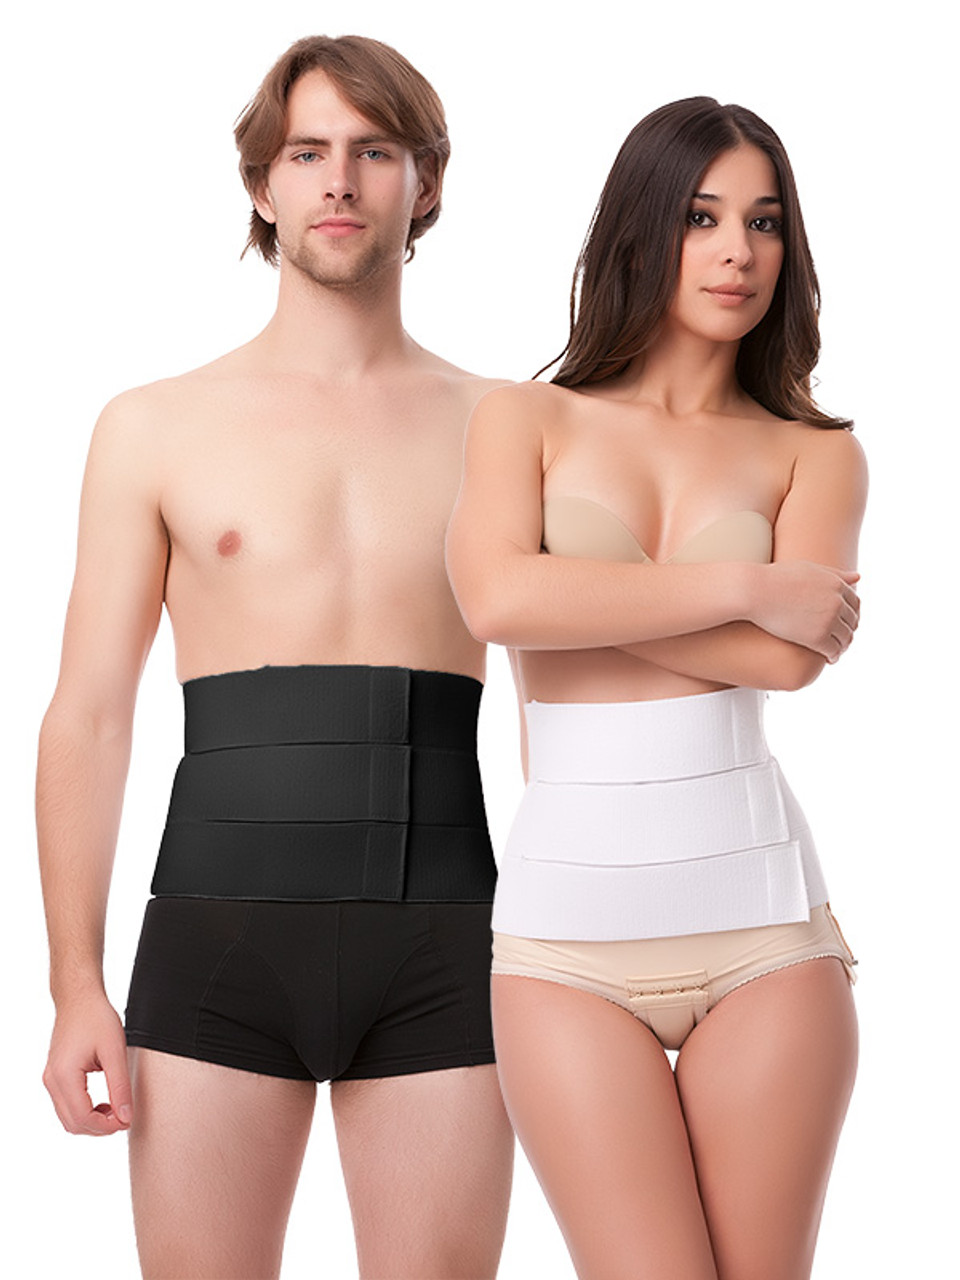 Post Delivery Abdominal Binder 12-inch with Velcro Closure. Men Compression  Shirts, Girdles, Chest Binders, Hernia Garments